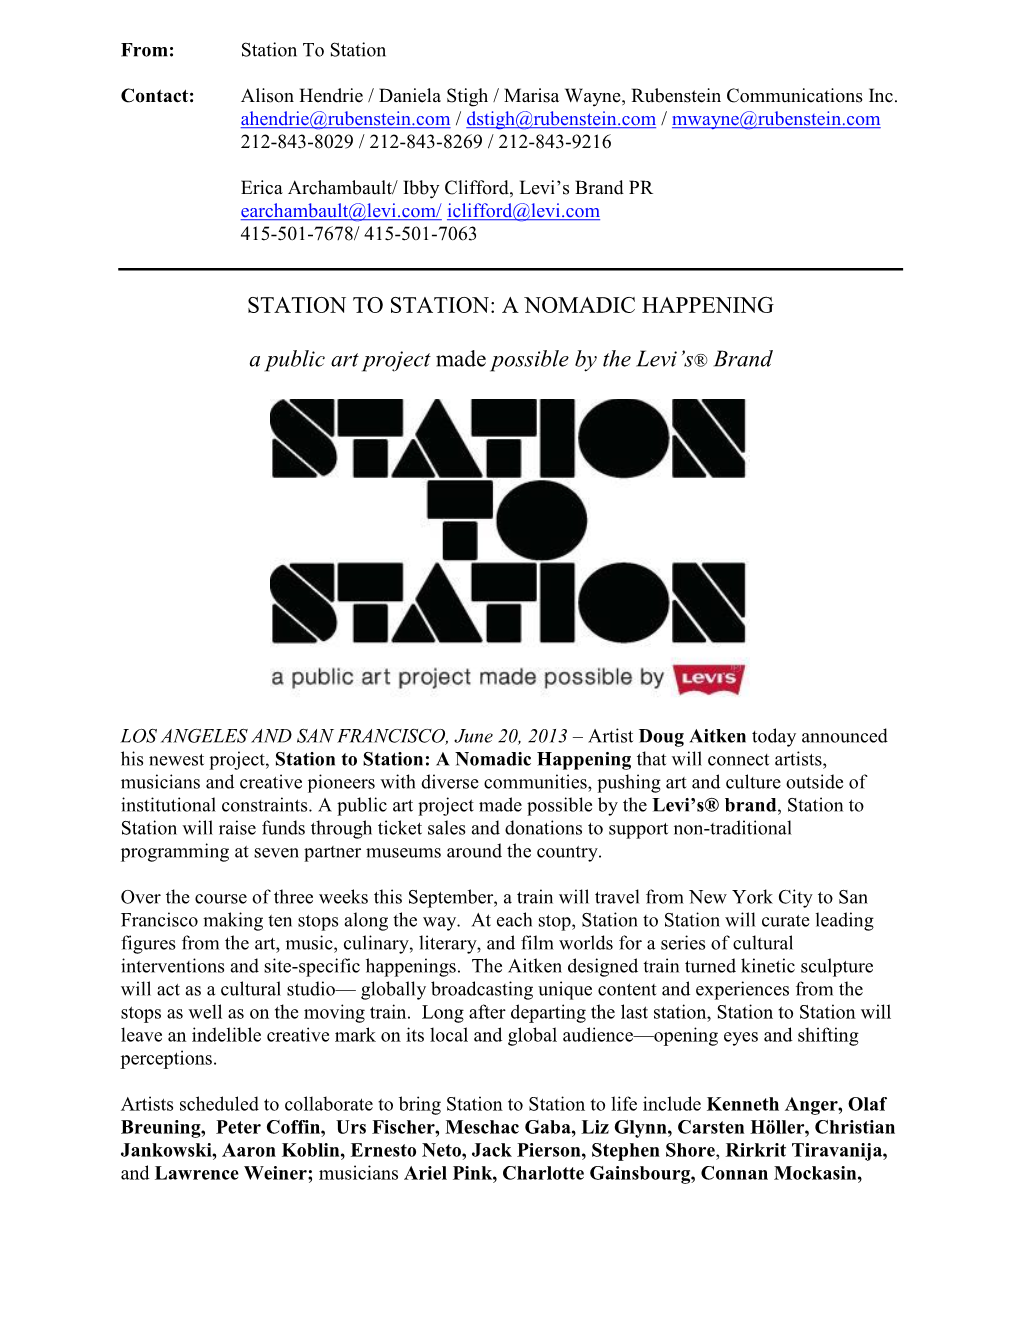 STATION to STATION: a NOMADIC HAPPENING a Public Art Project